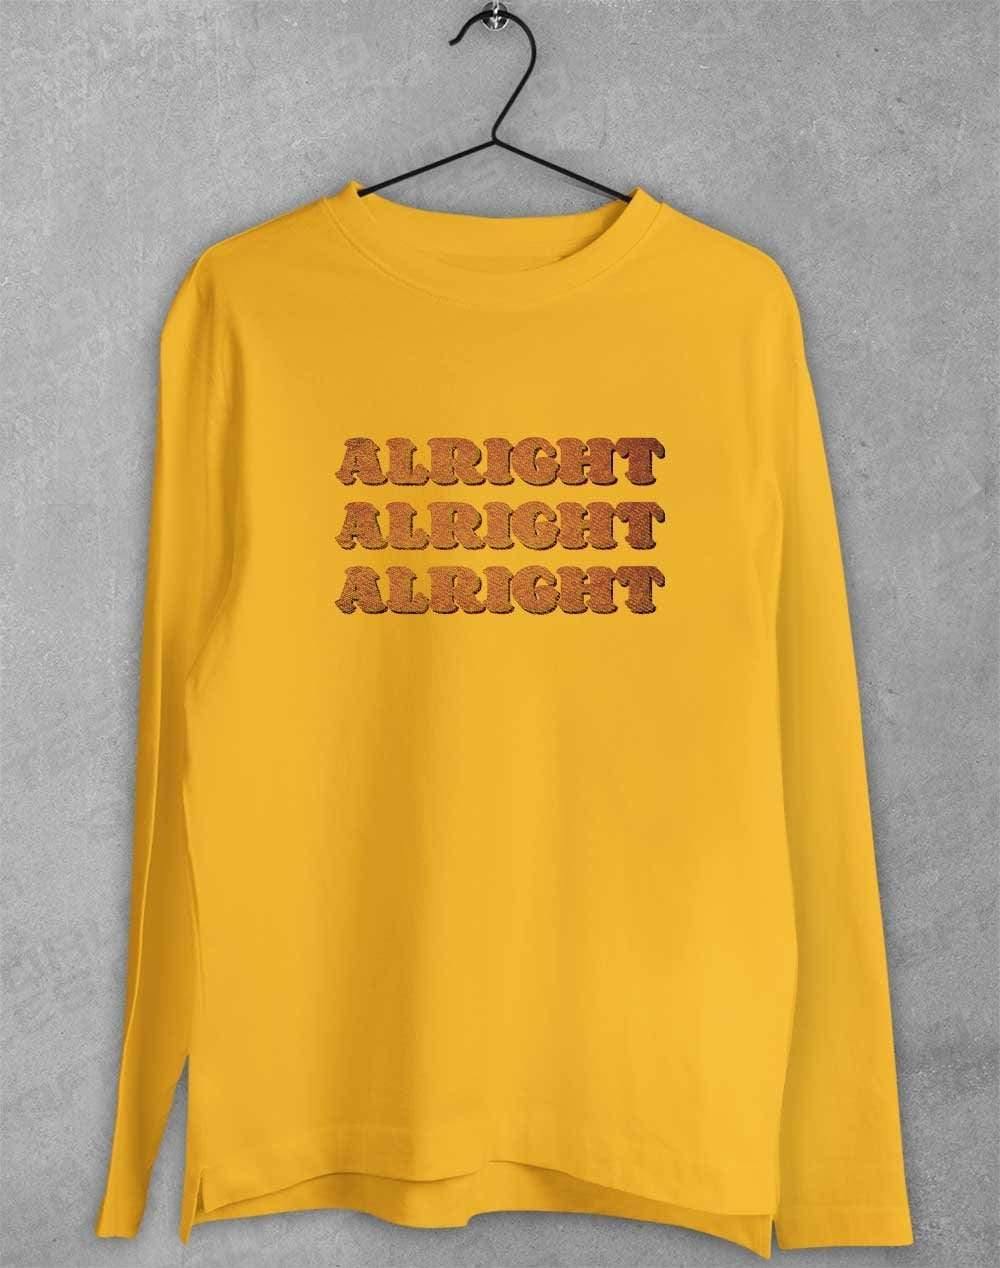 Alright Alright Alright Long Sleeve T-Shirt S / Gold  - Off World Tees